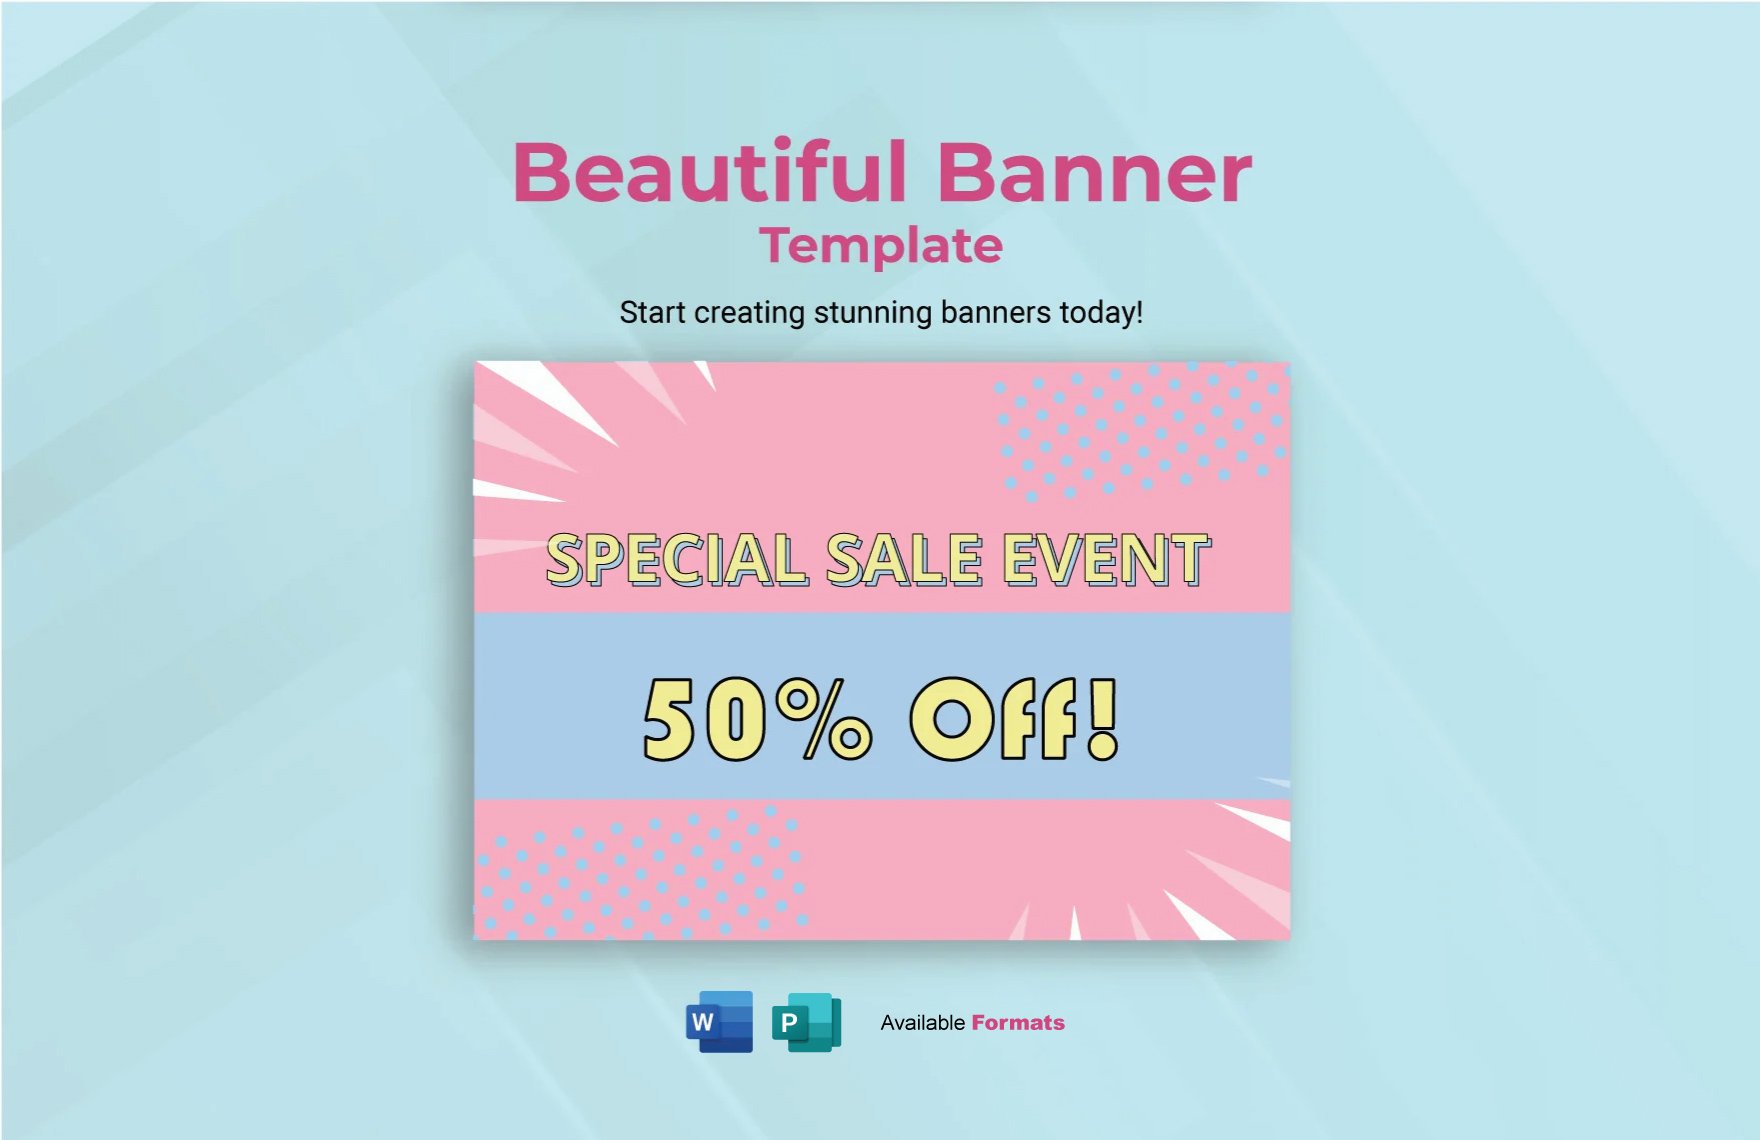 Beautiful Banner Template in Word, Publisher